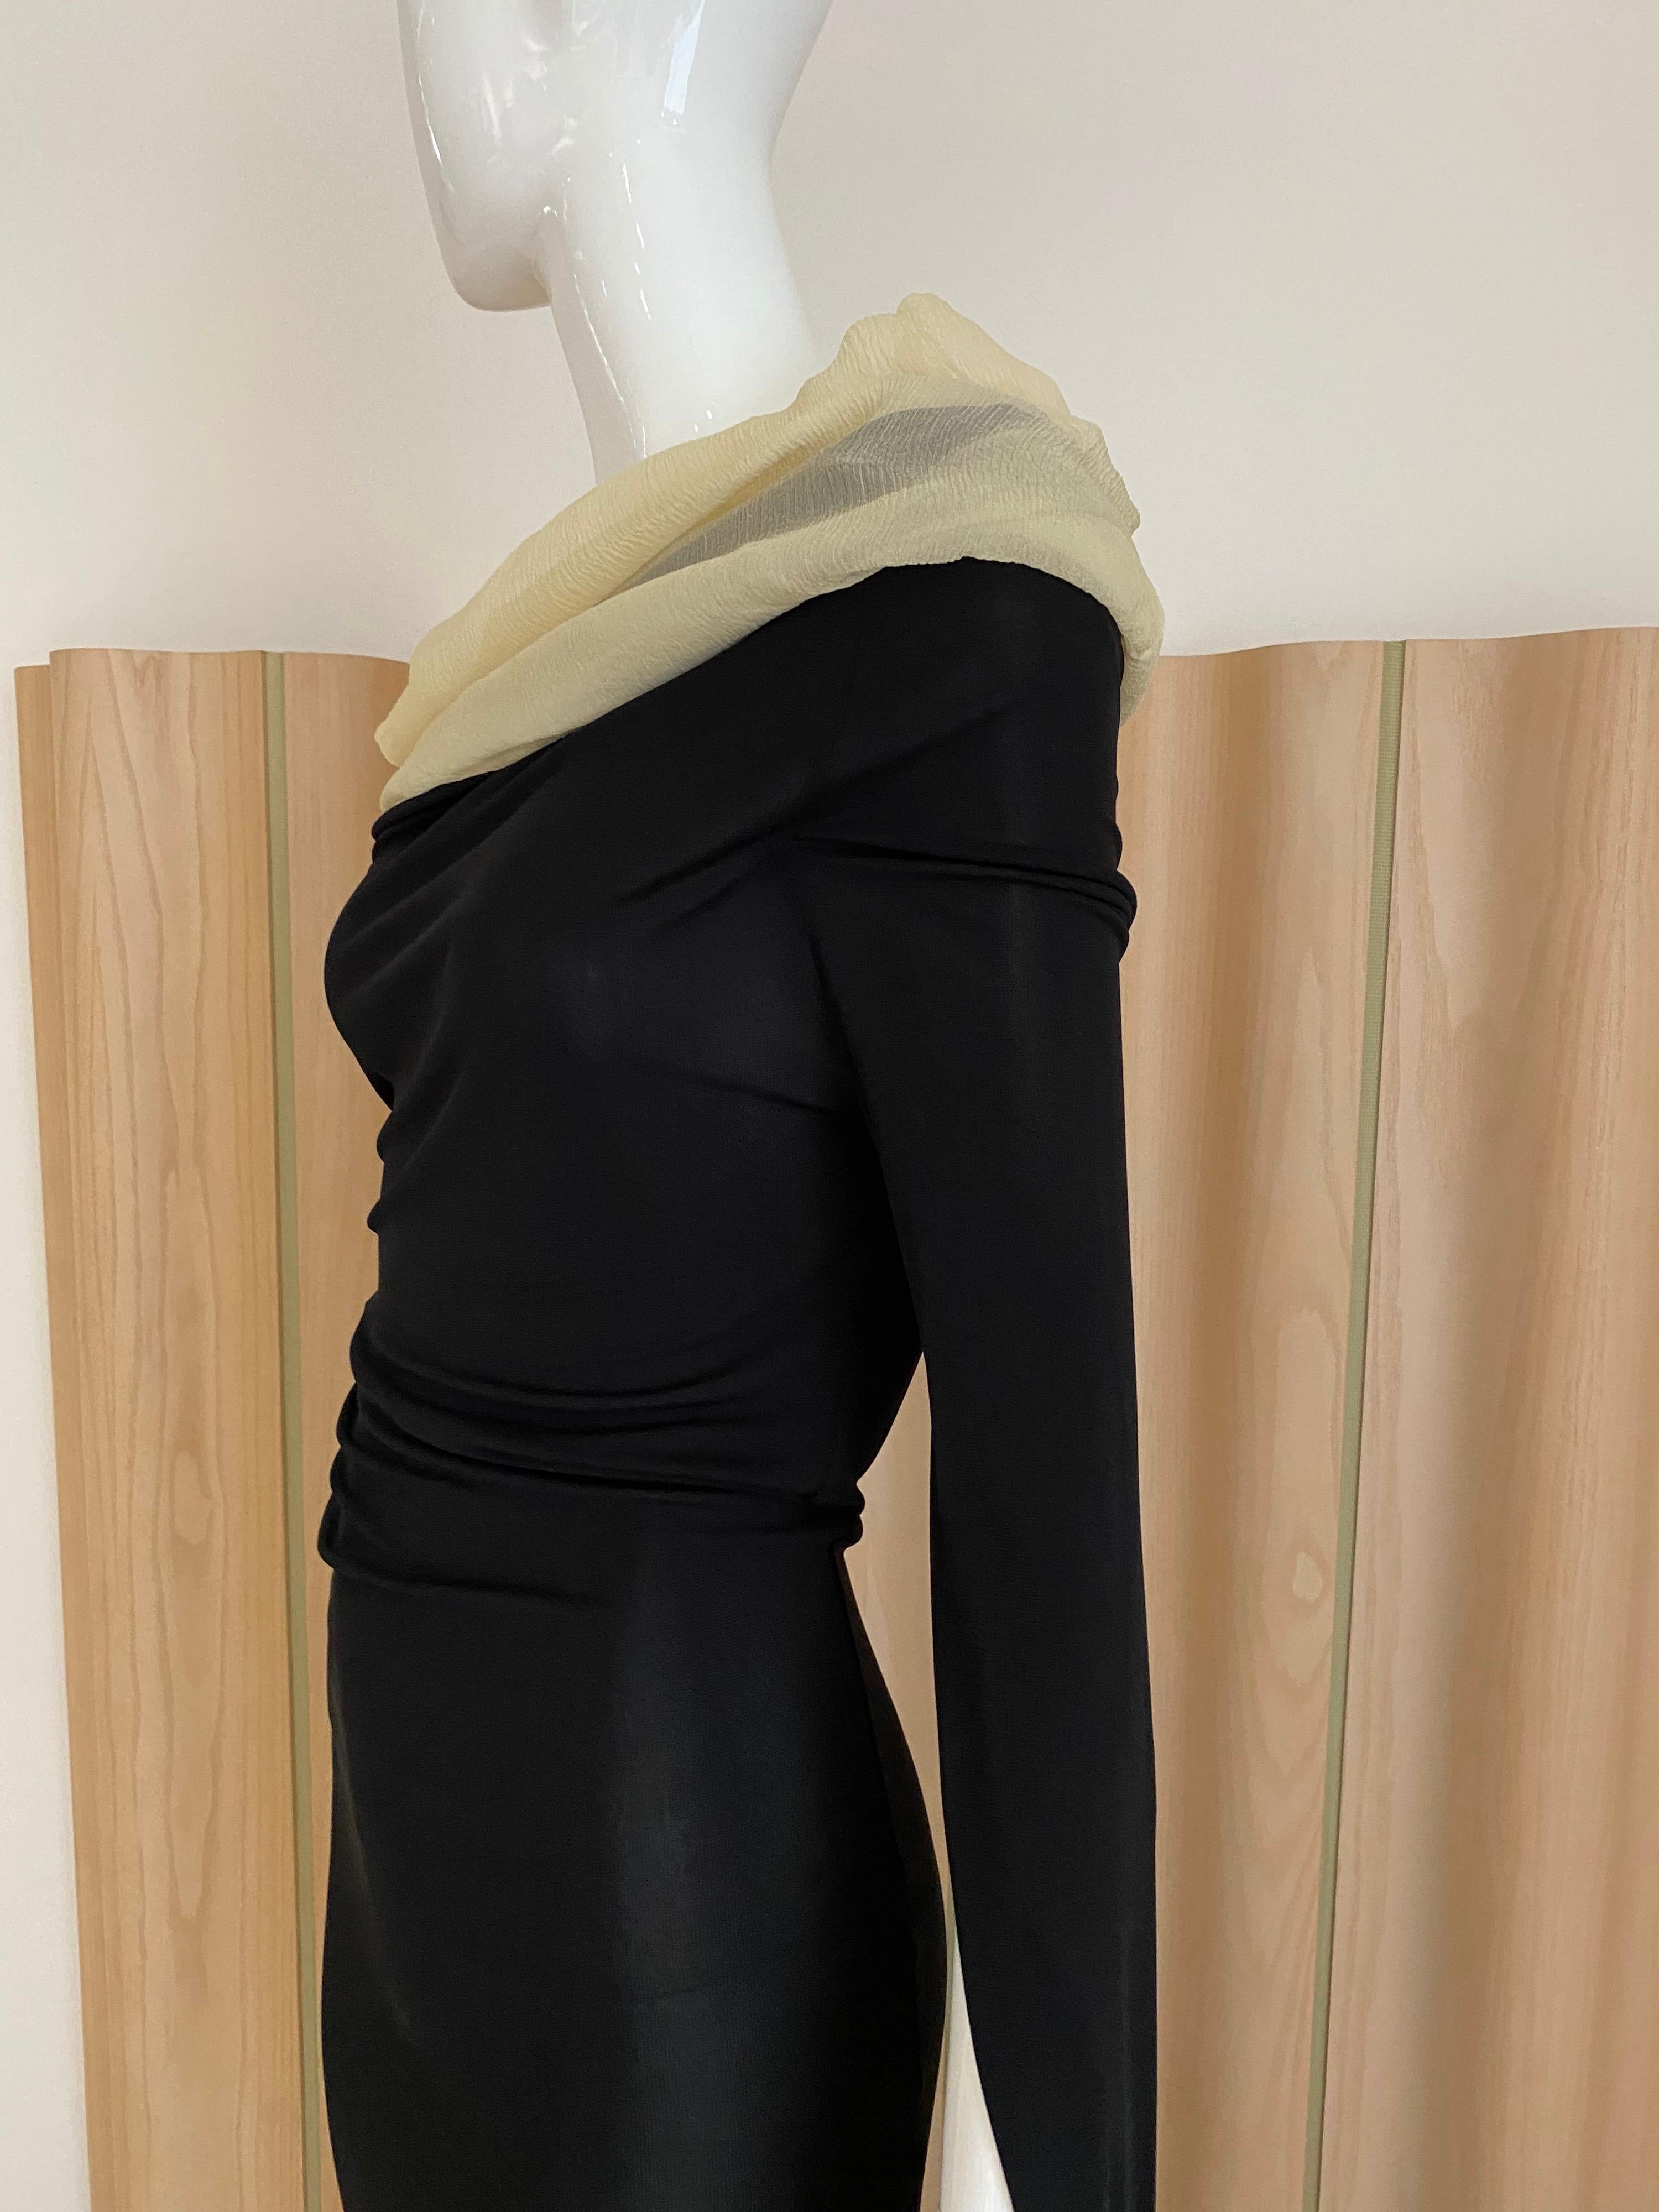 1990s Jean Paul Gaultier Black Knit Dress with Cut Out Sleeves 2